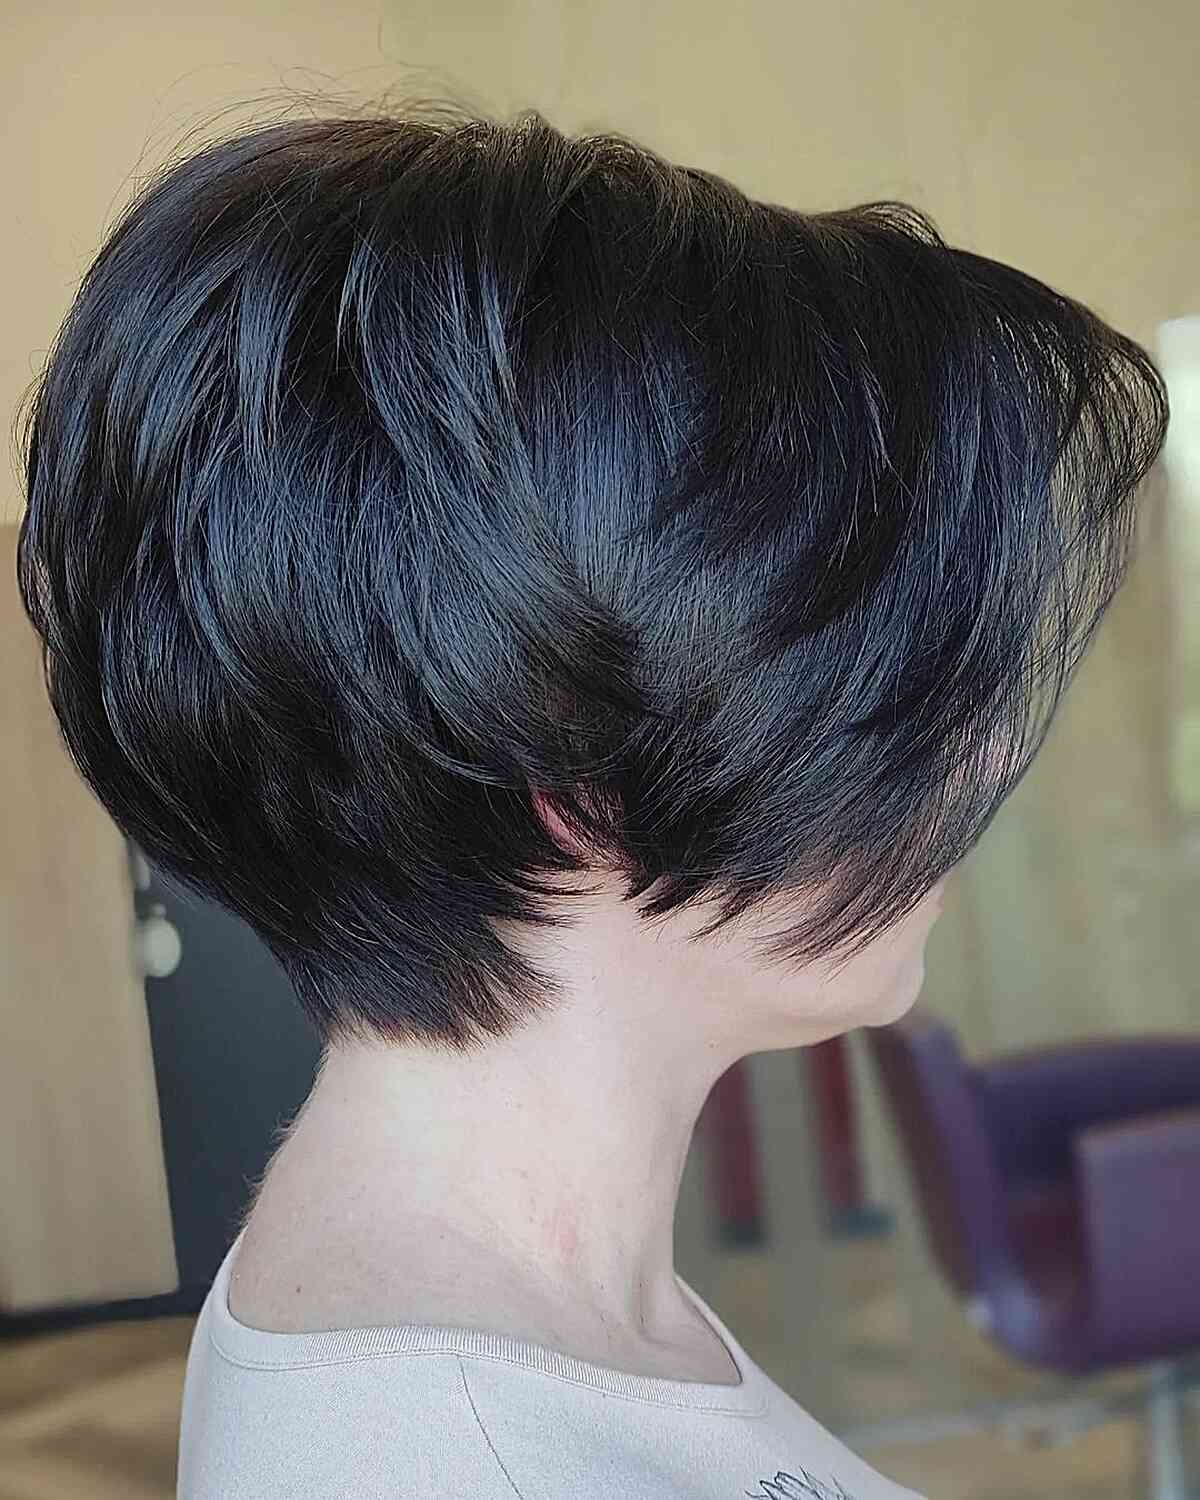 Short Chocolate Pixie Bob with Choppy Layers for ladies with short hair